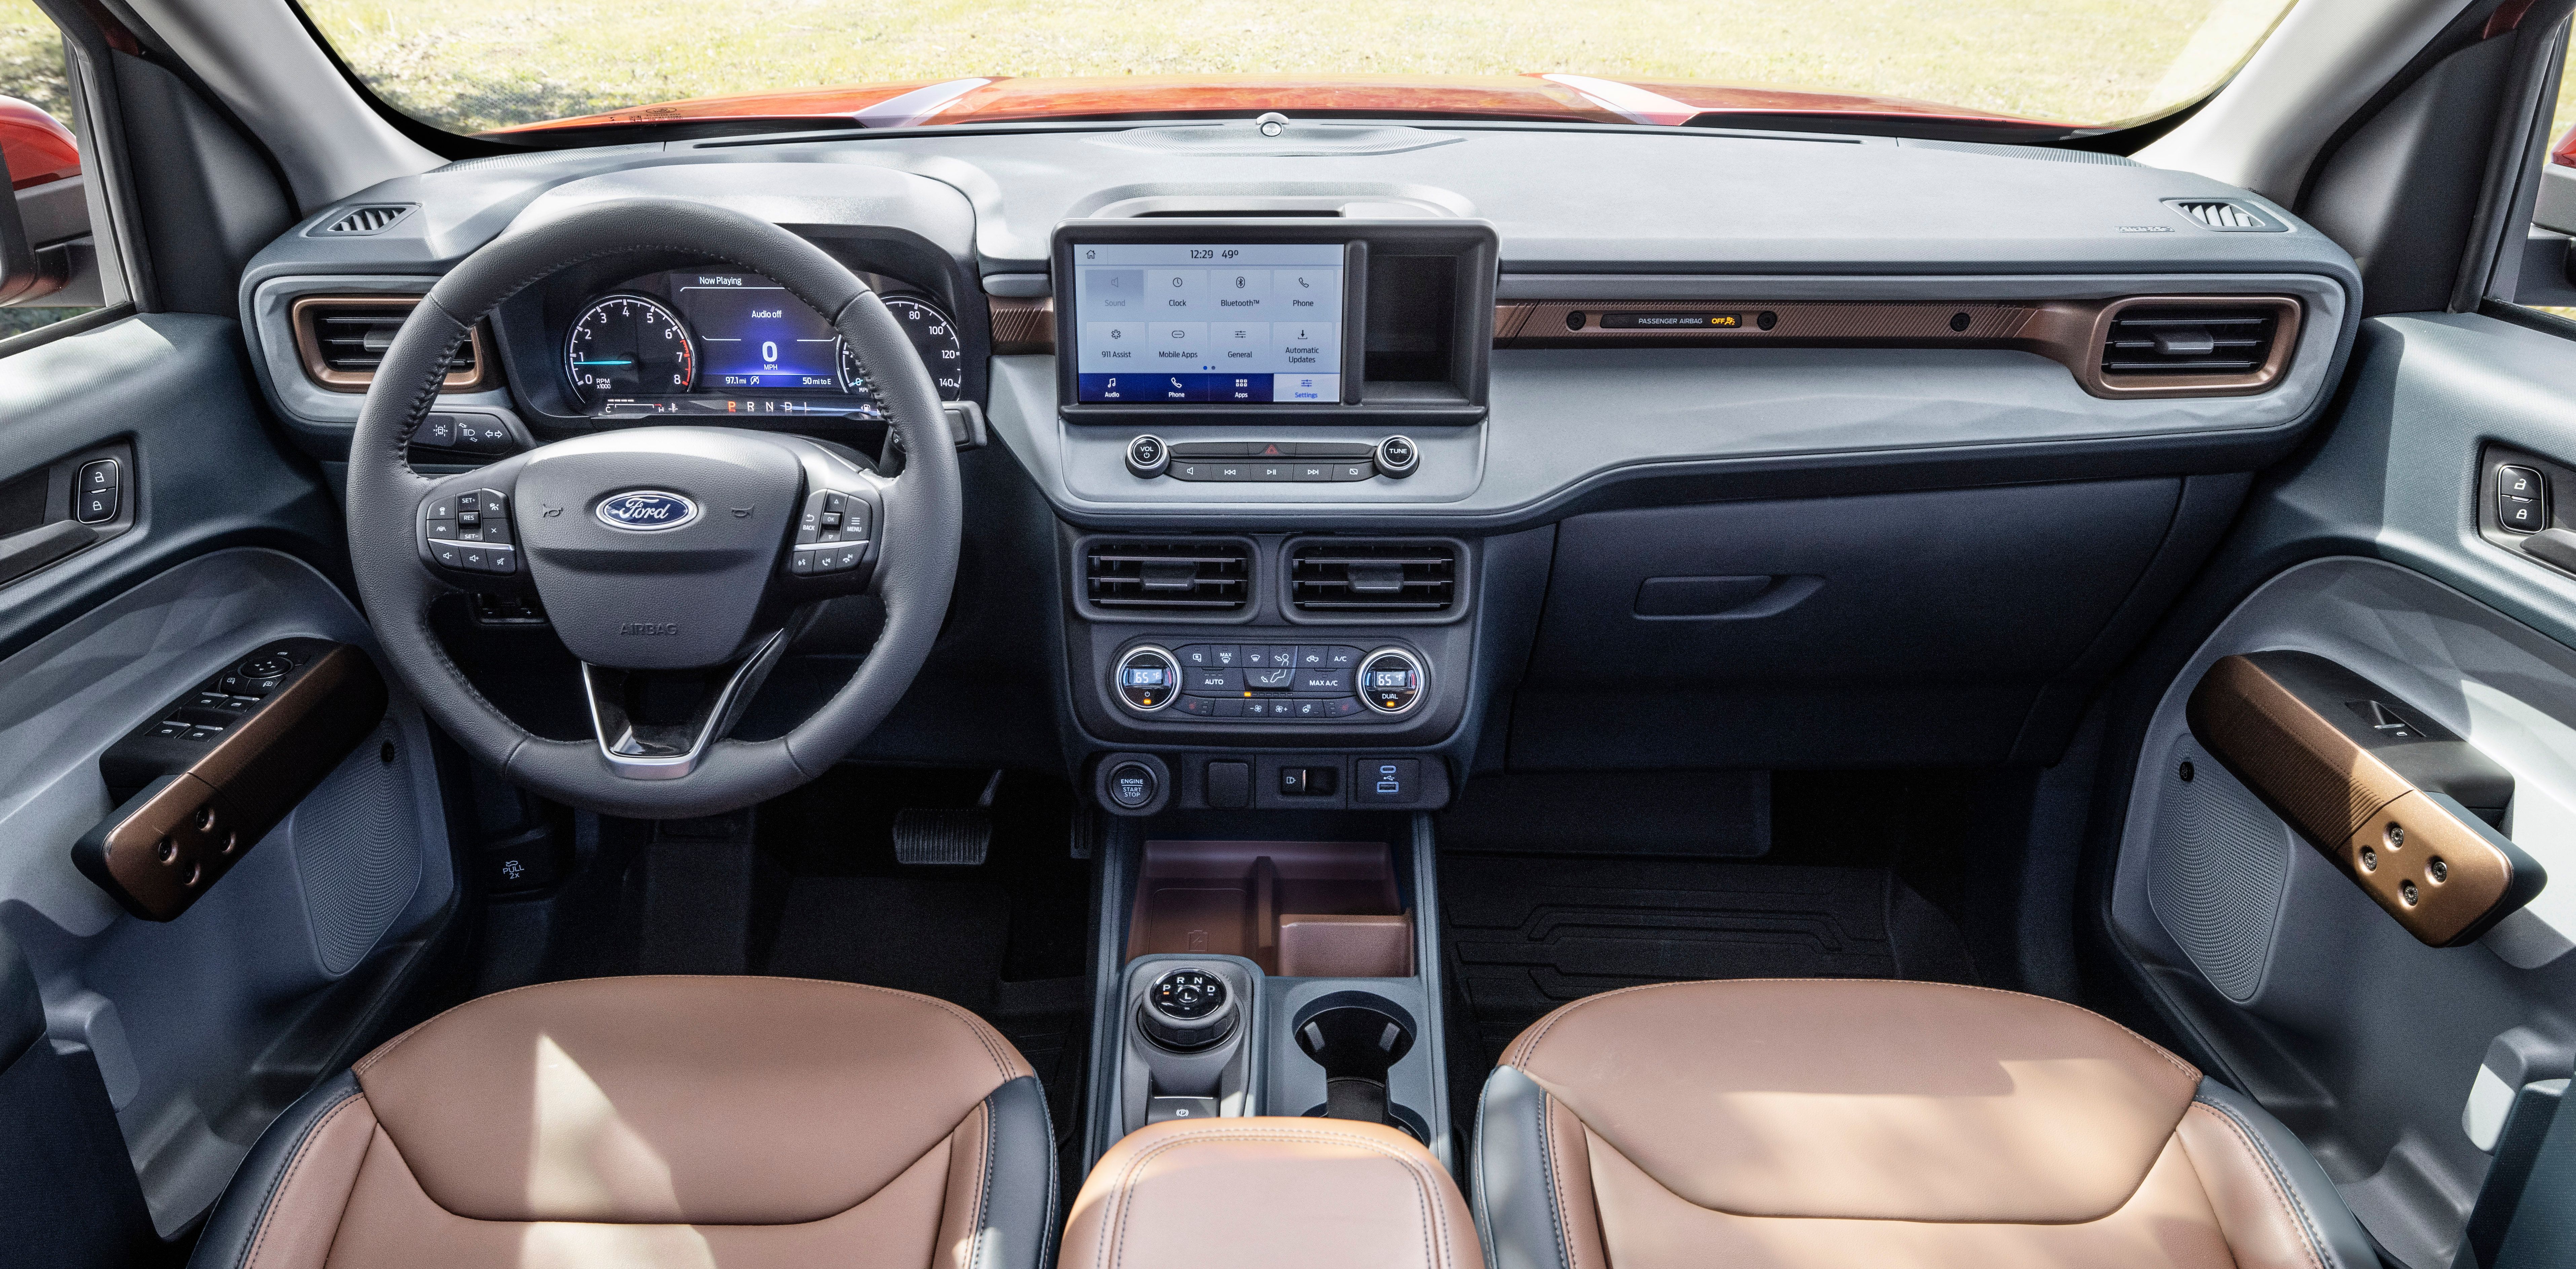 The interior of the 2022 Ford Maverick.